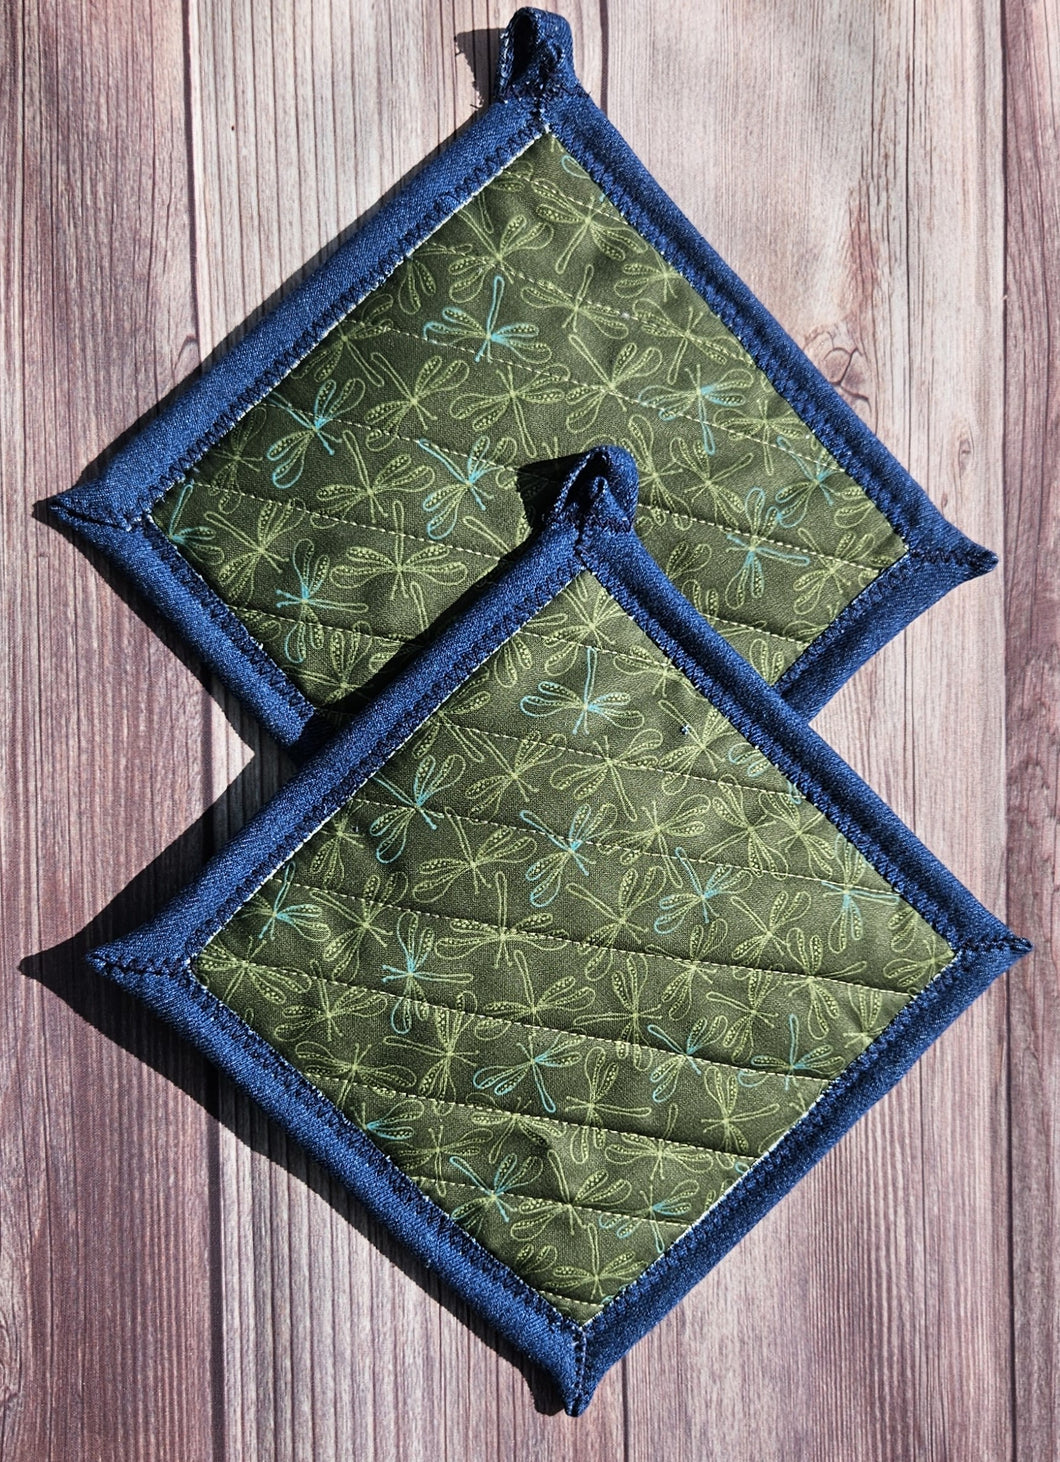 Pot Holders - Green and Blue Dragonflies